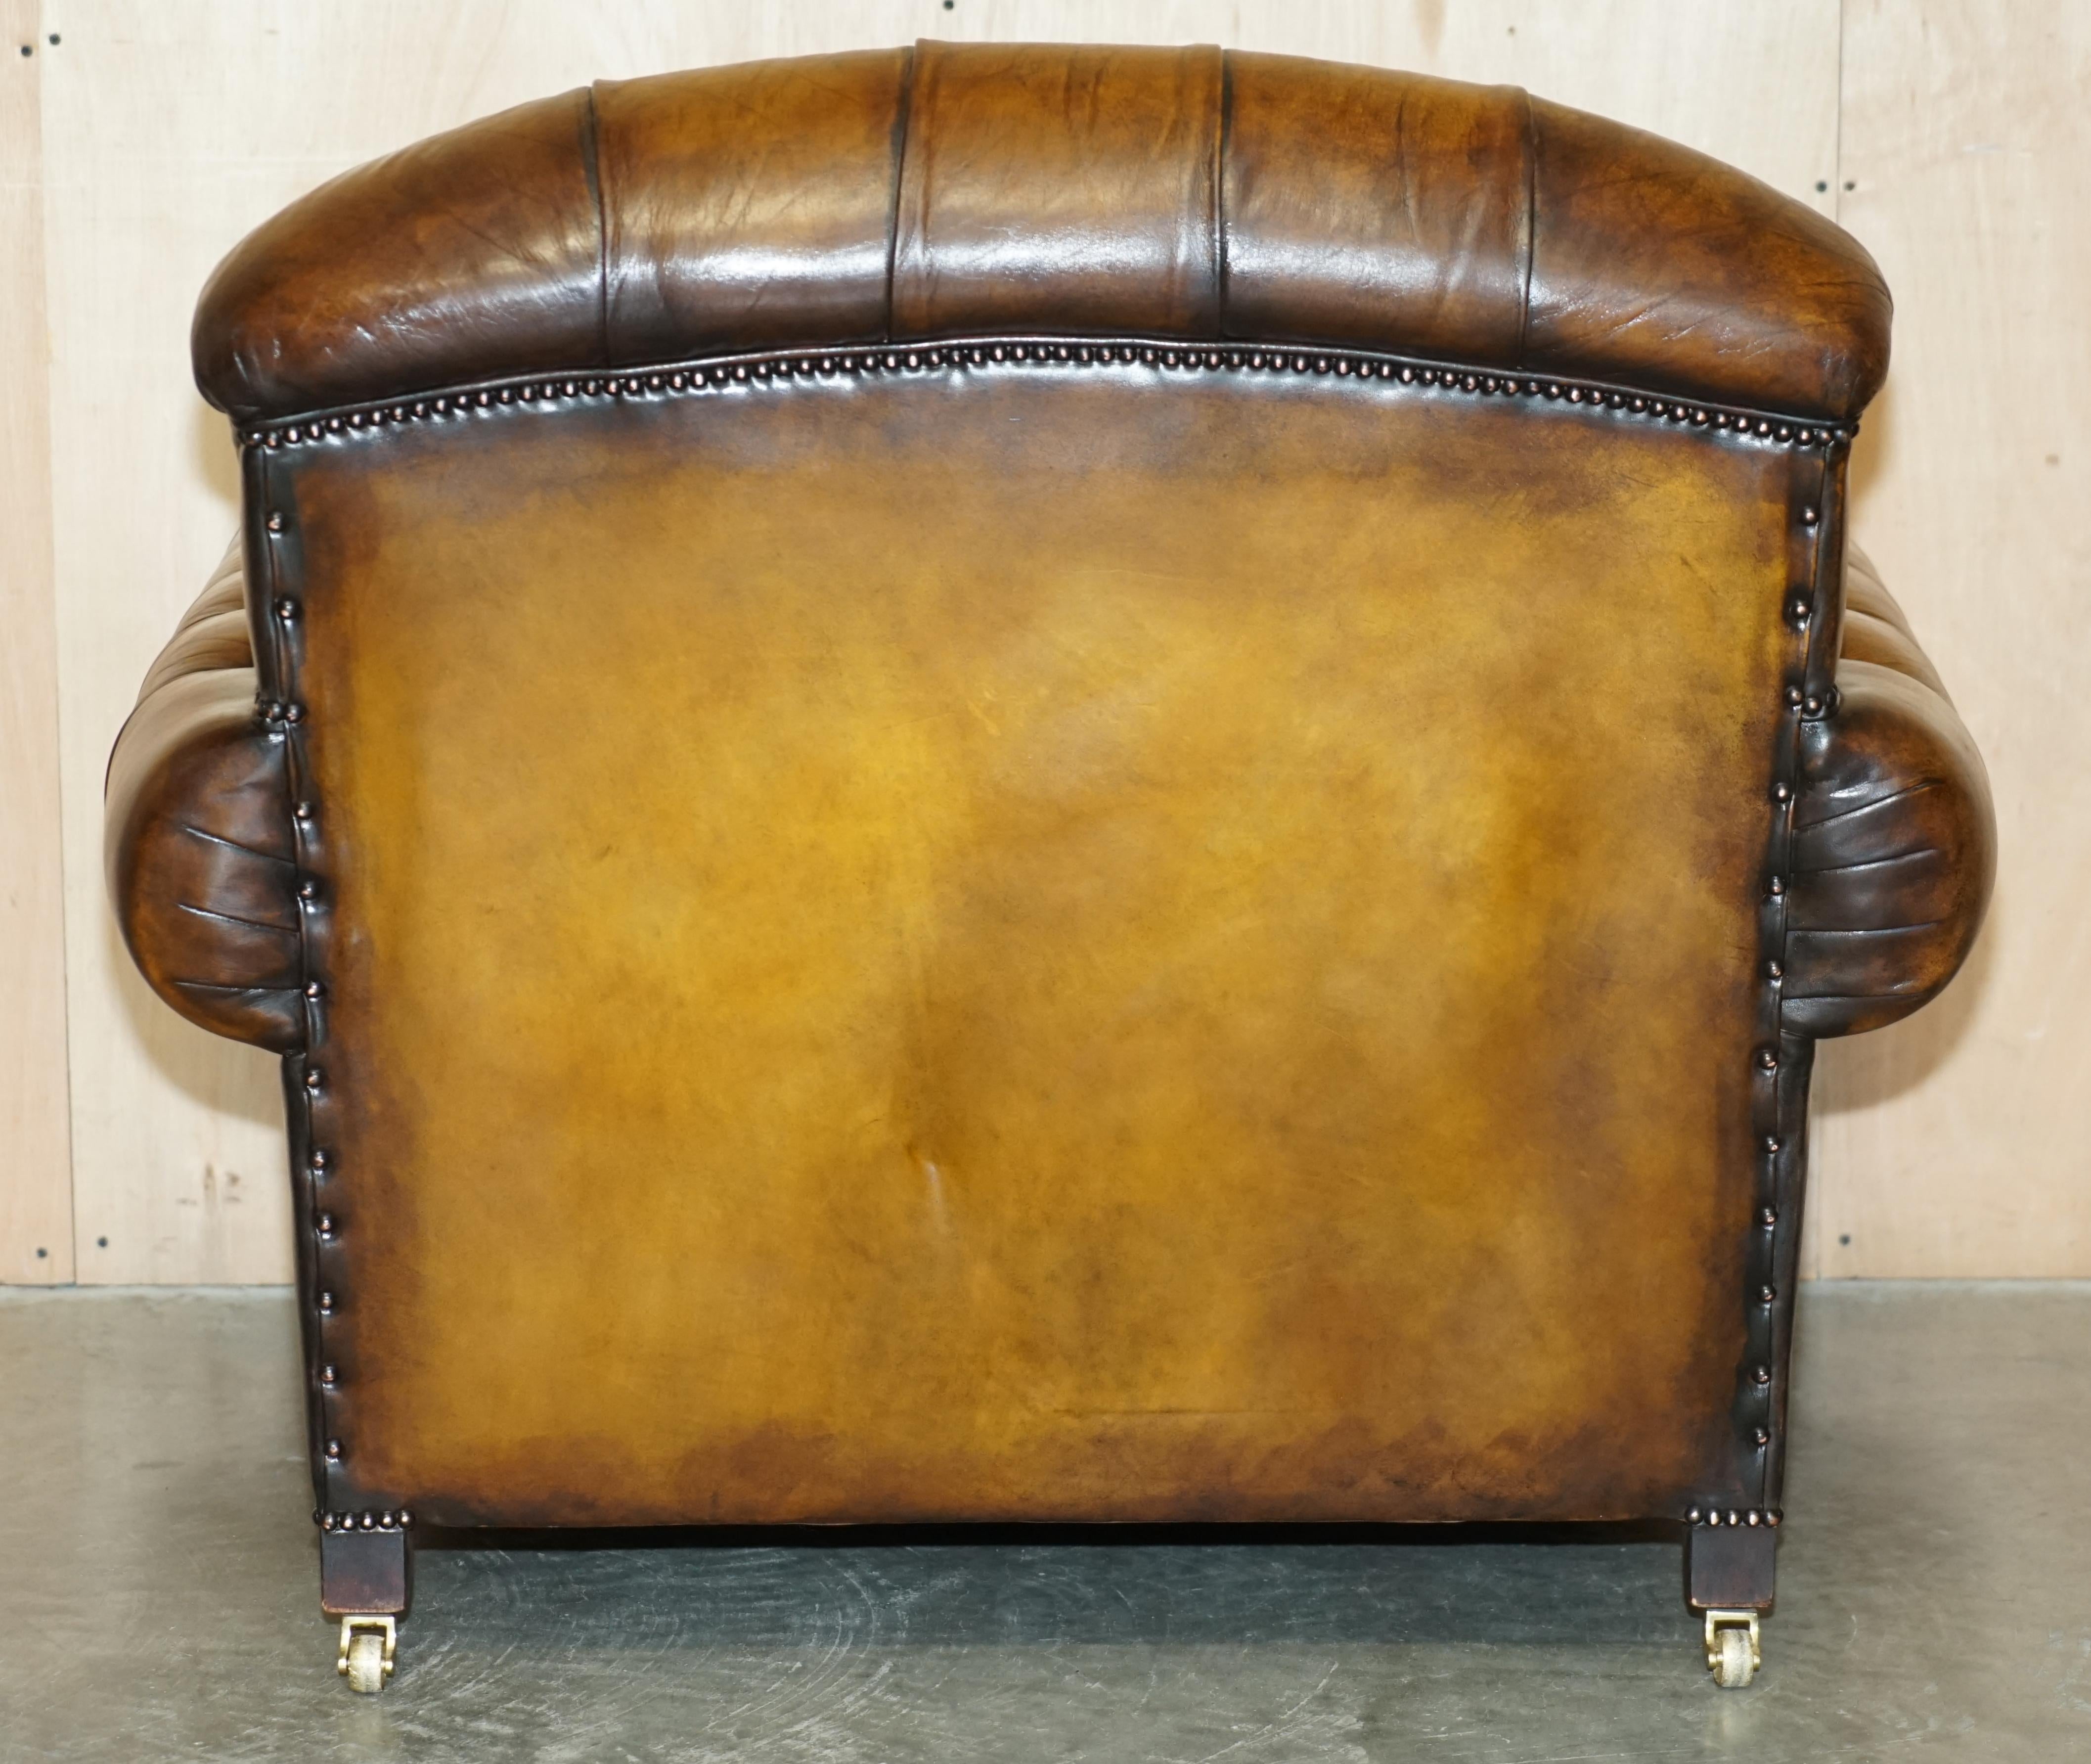 PAIR OF FULLY RESTORED GEORGE SMiTH BULGARU BROWN LEATHER CHESTERFIELD ARMCHAIRS For Sale 11